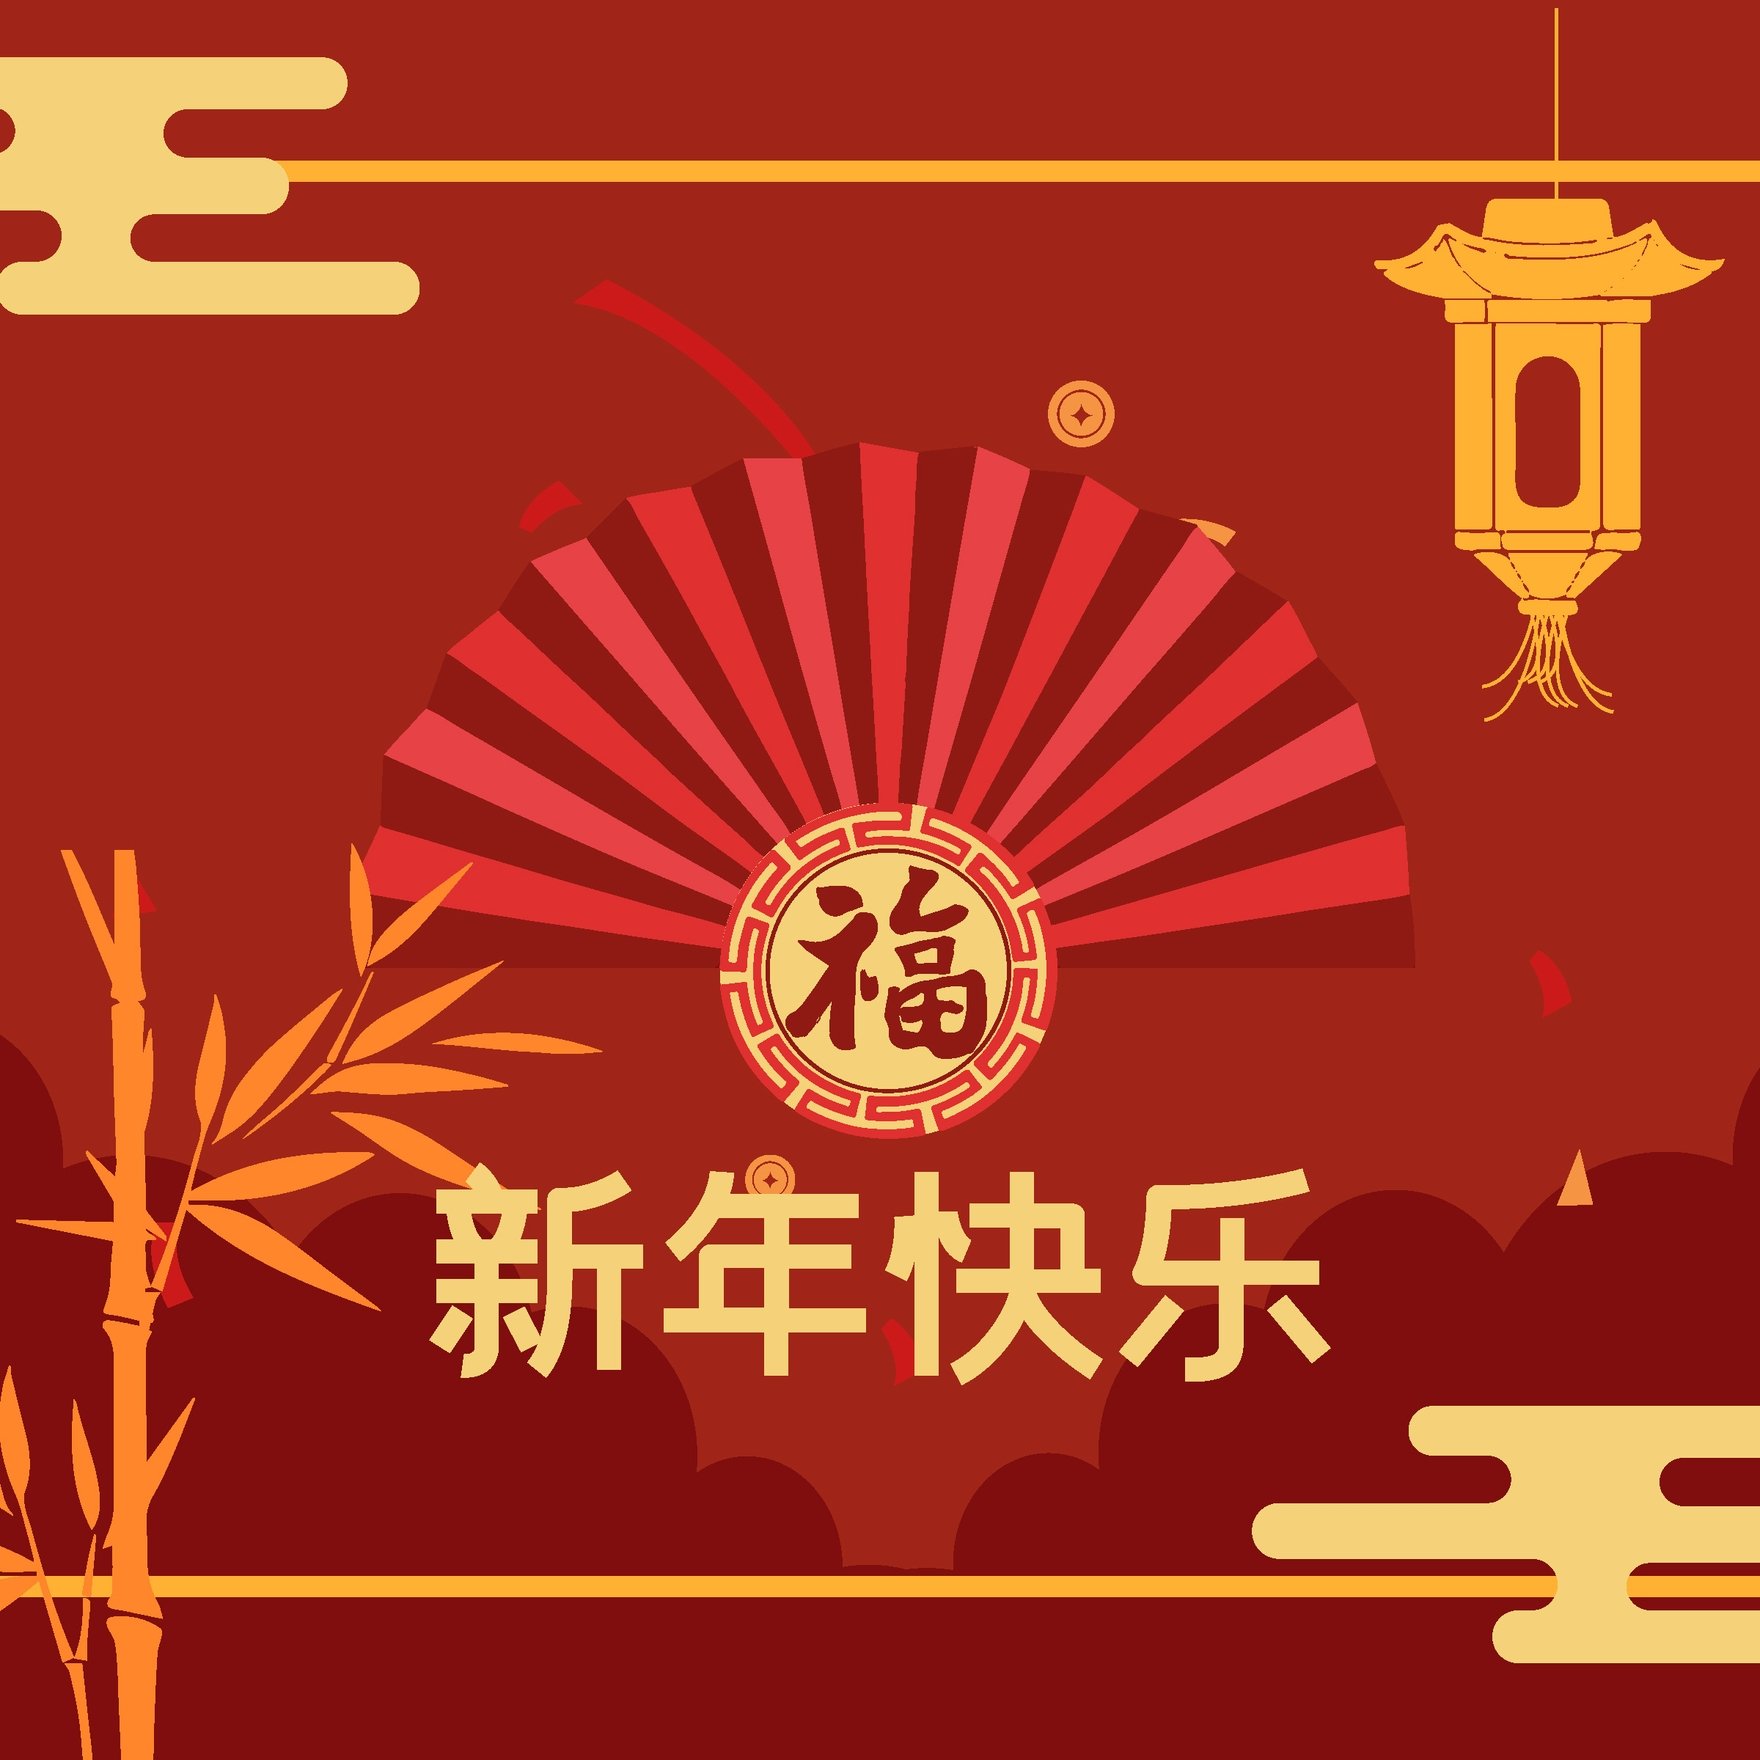 Chinese New Year Design Vector